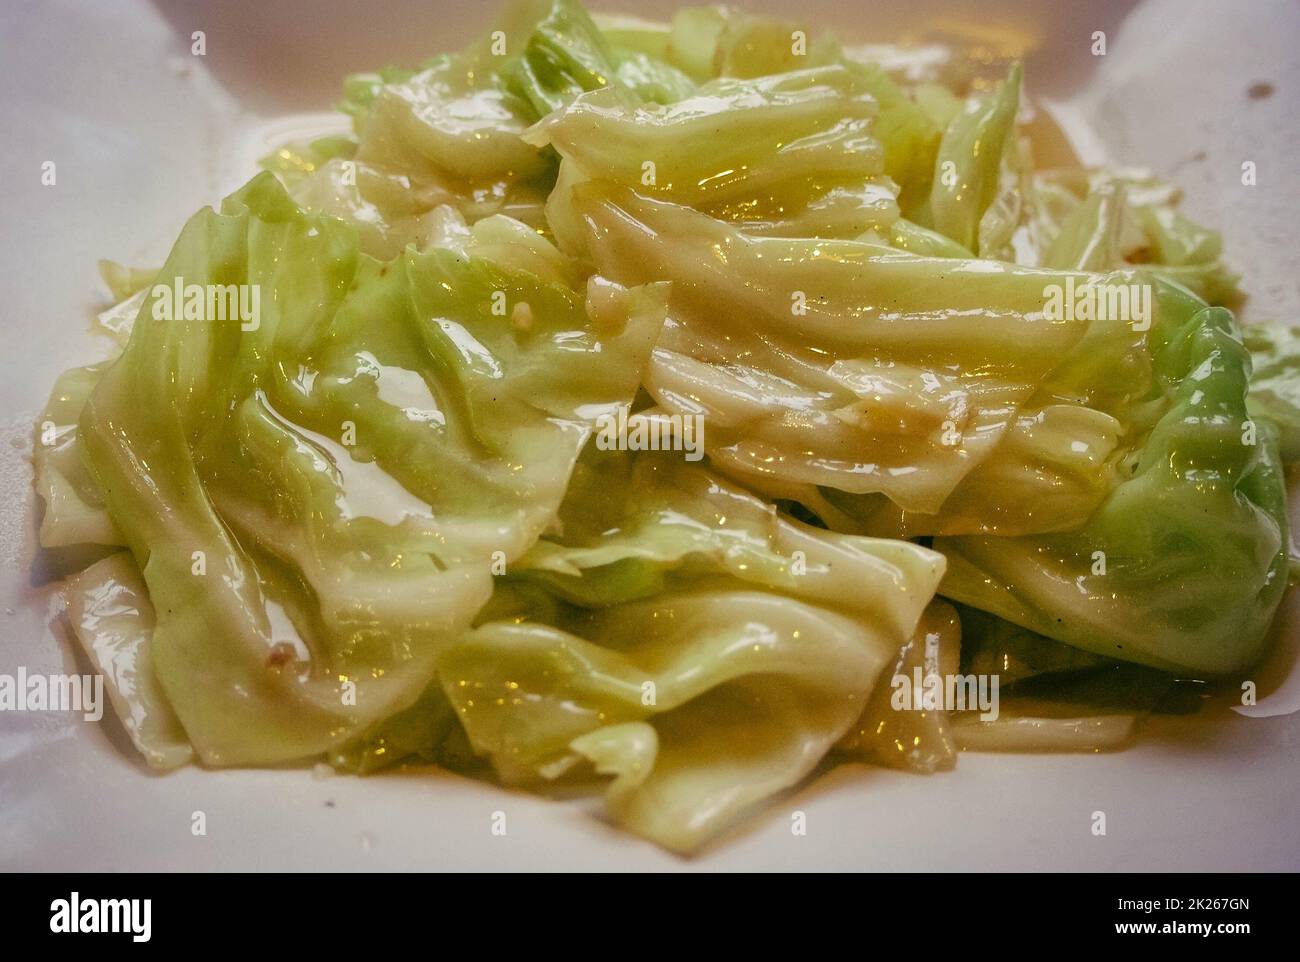 Fried Cabbage with Fish Sauce food traditional lunch object still life image Stock Photo